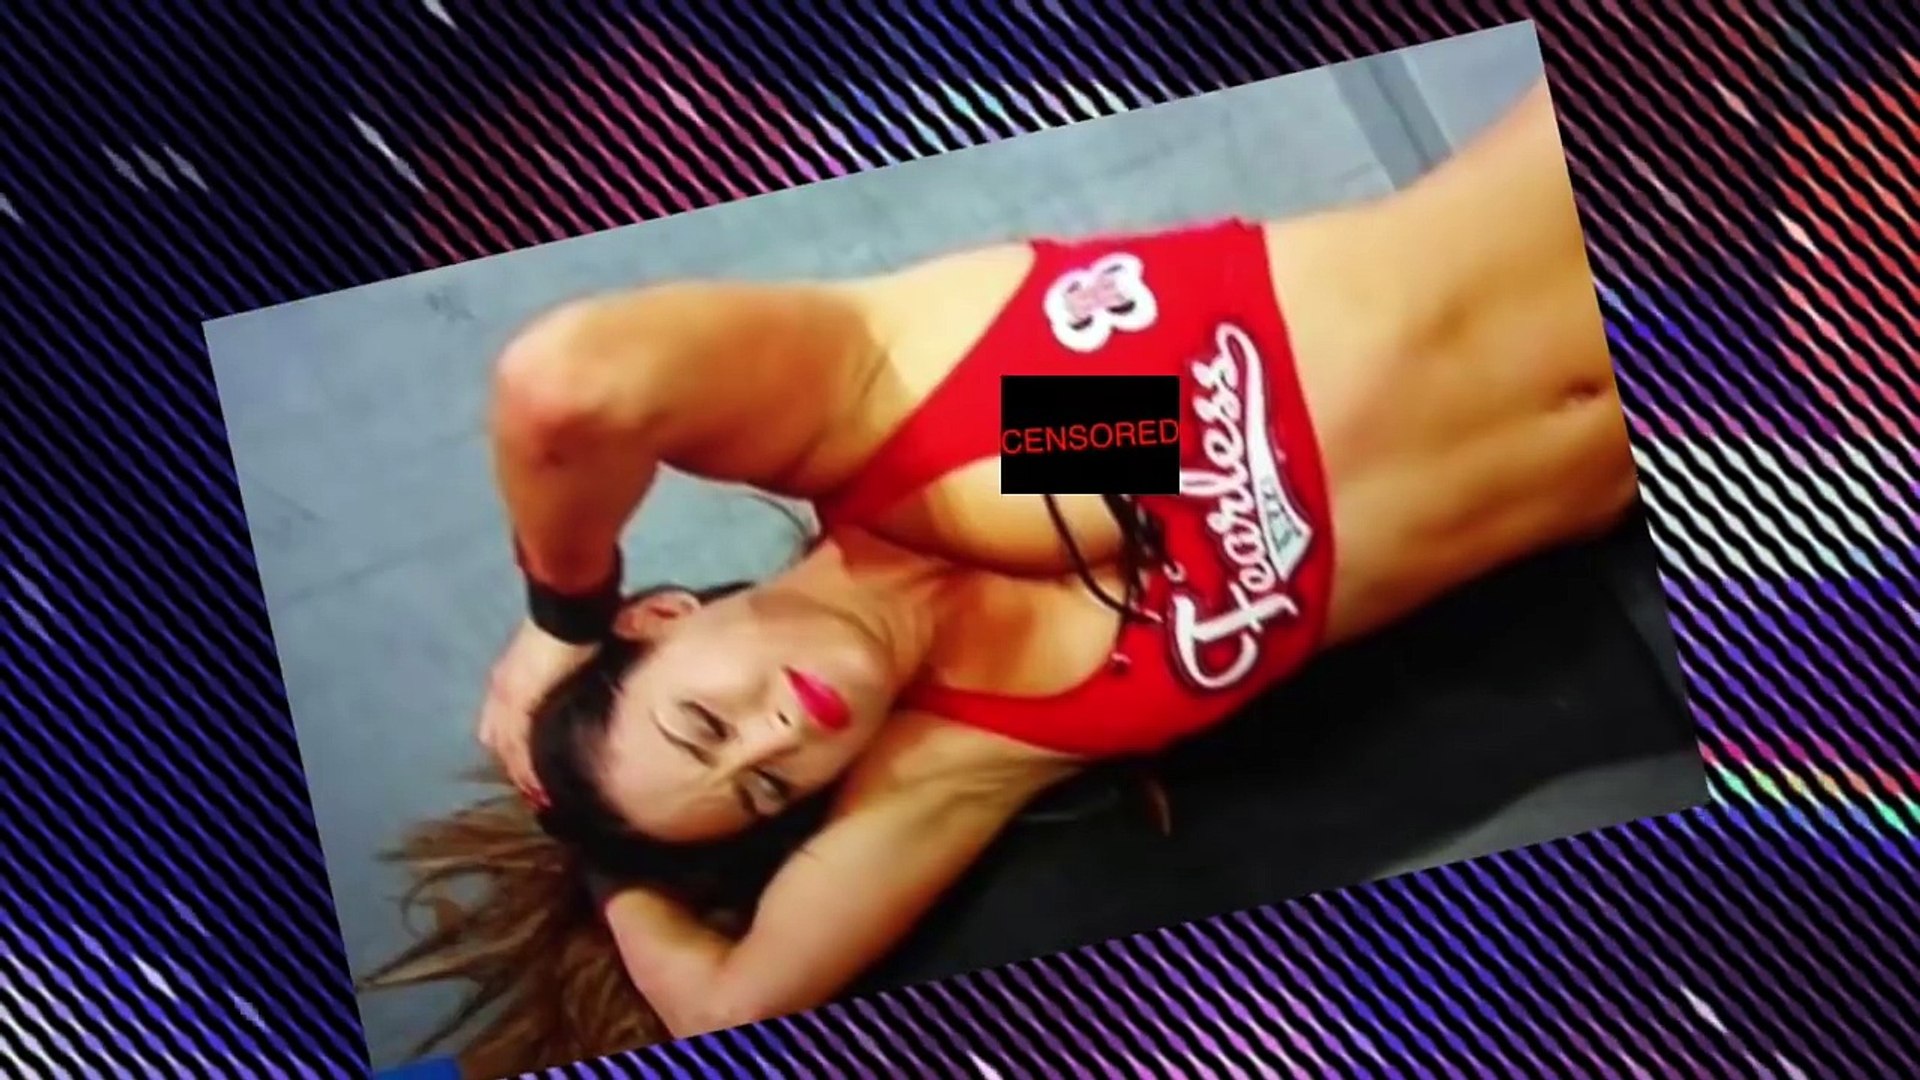 barbara womble recommends wrestling diva wardrobe malfunctions pic